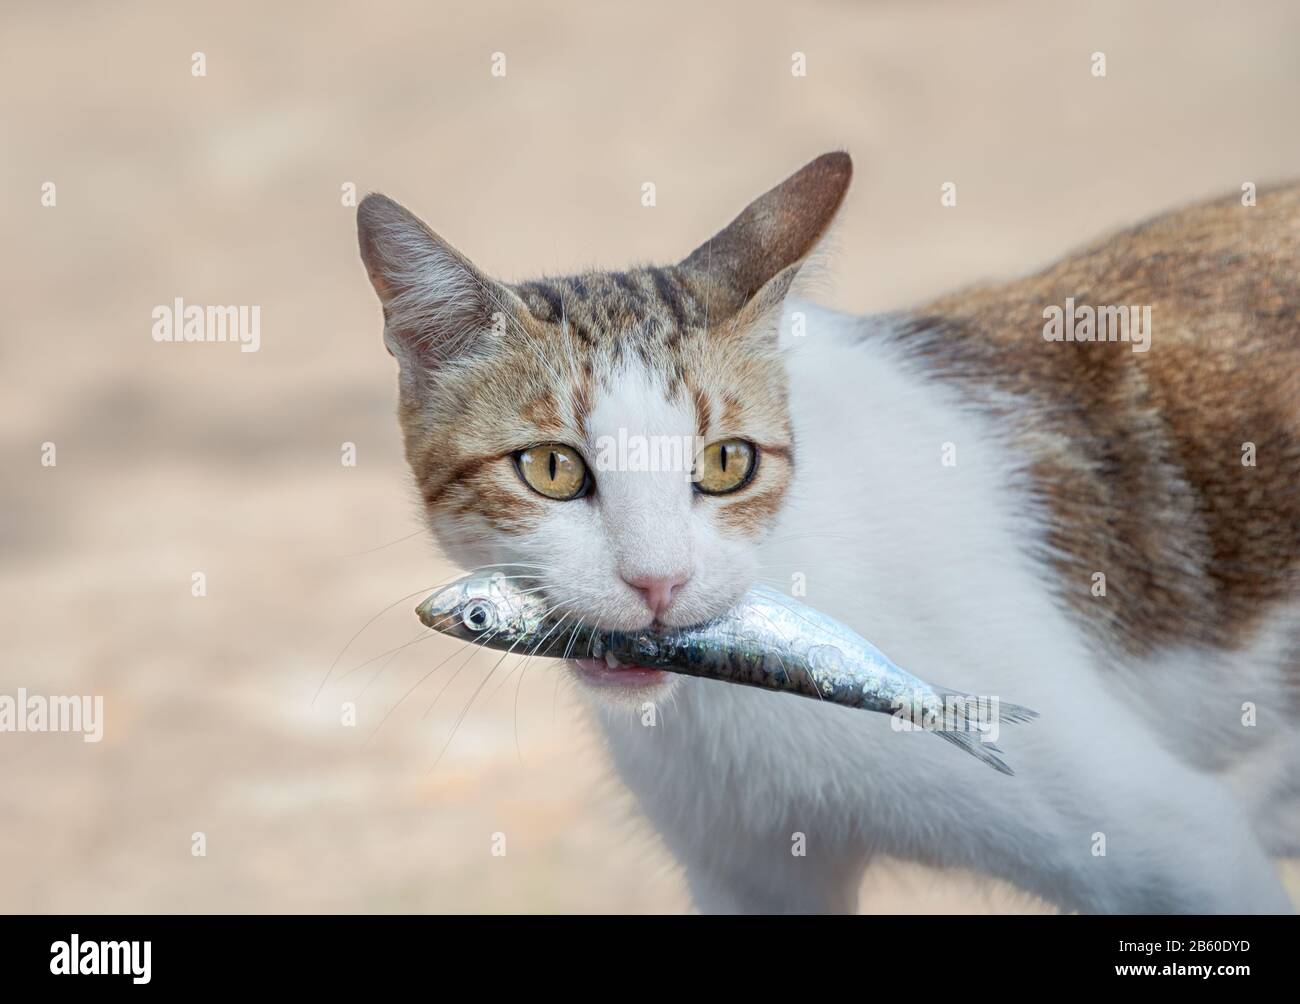 Young hungry cat portrait, bicolor white tabby, holding a fresh fish in its mouth, eating a tasty and wholesome meal, Greece Stock Photo